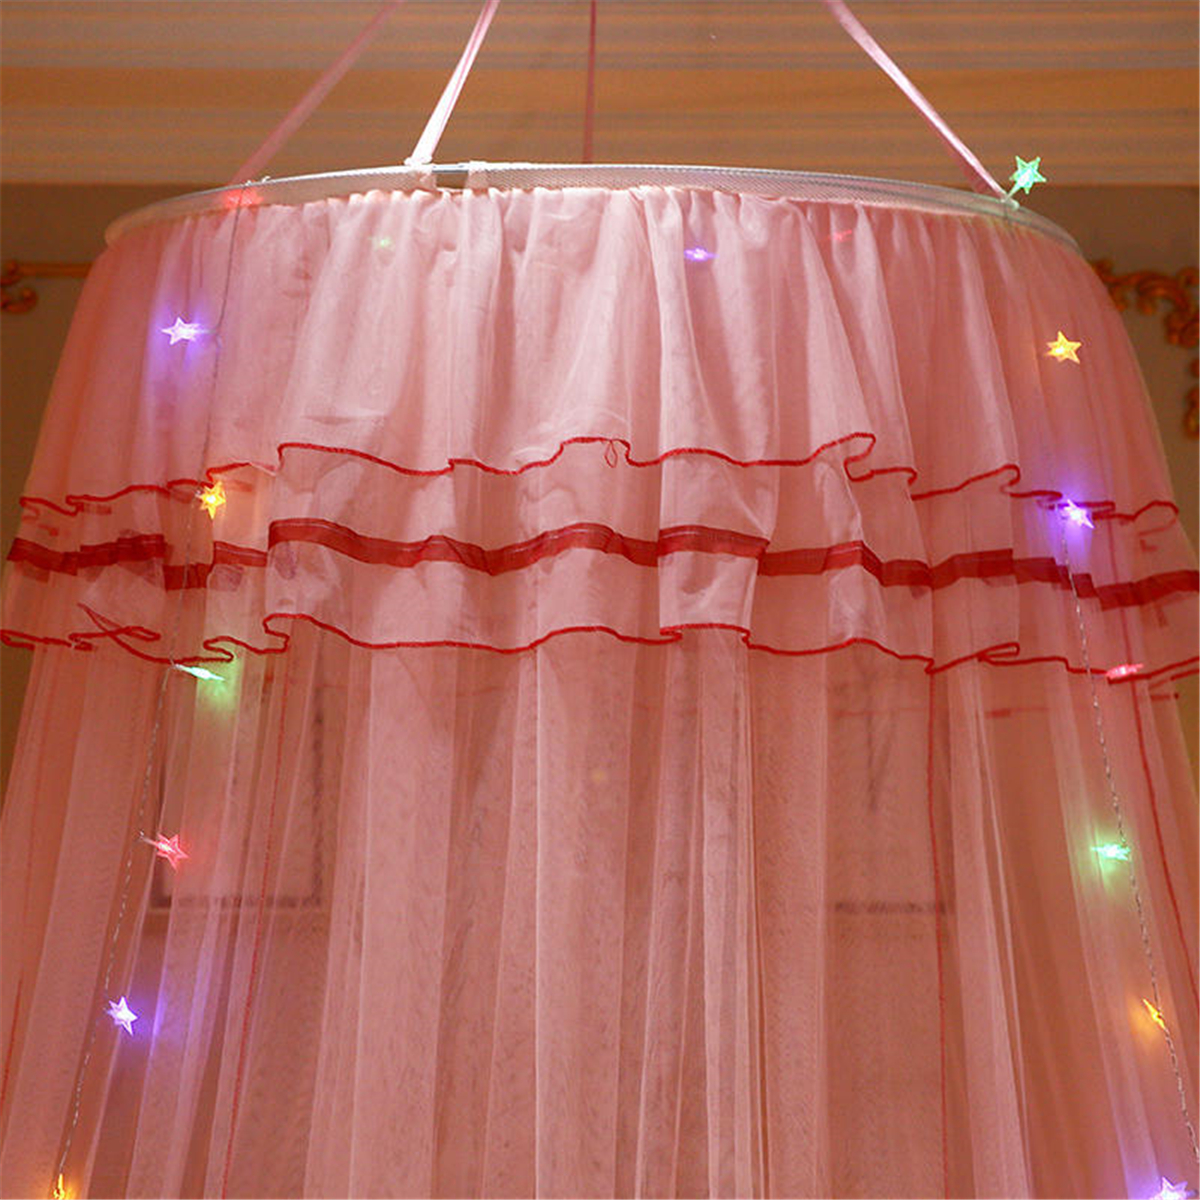 Ceiling-Mounted-Mosquito-Net-Free-Installation-Home-Dome-Foldable-Bed-Canopy-with-LED-String-Light-1806505-8